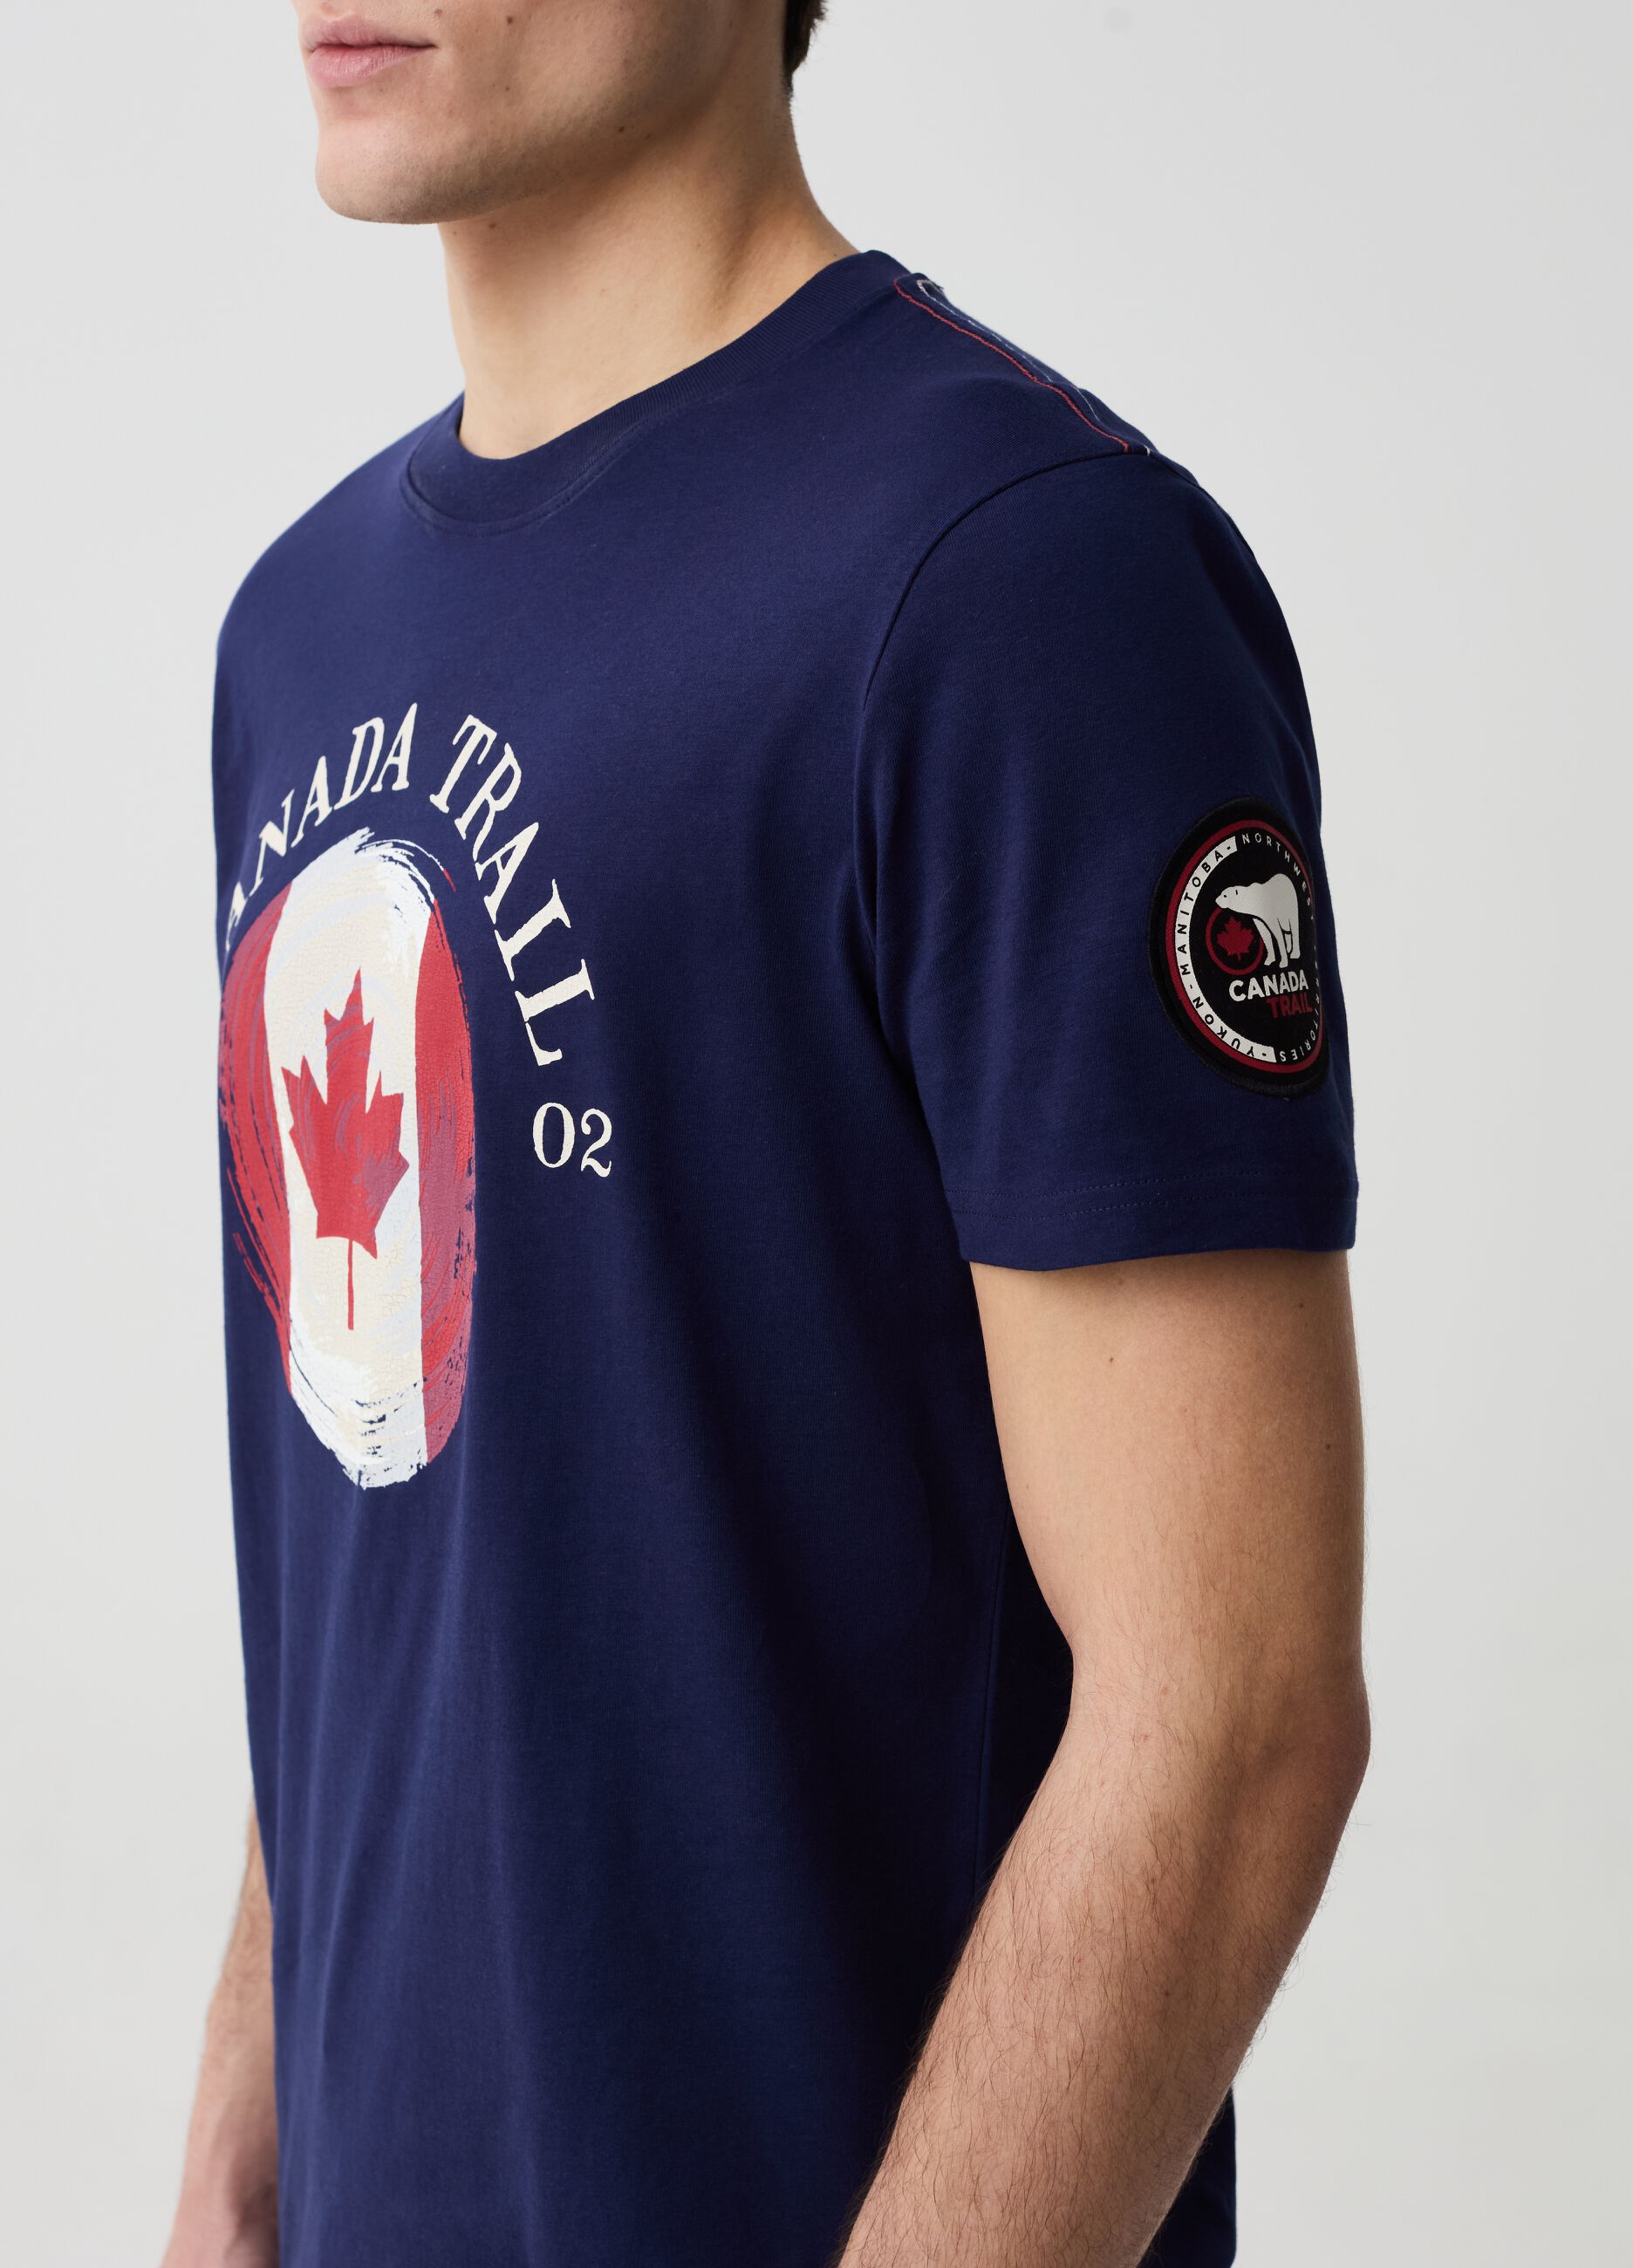 T-shirt with round neck and Canada Trail print